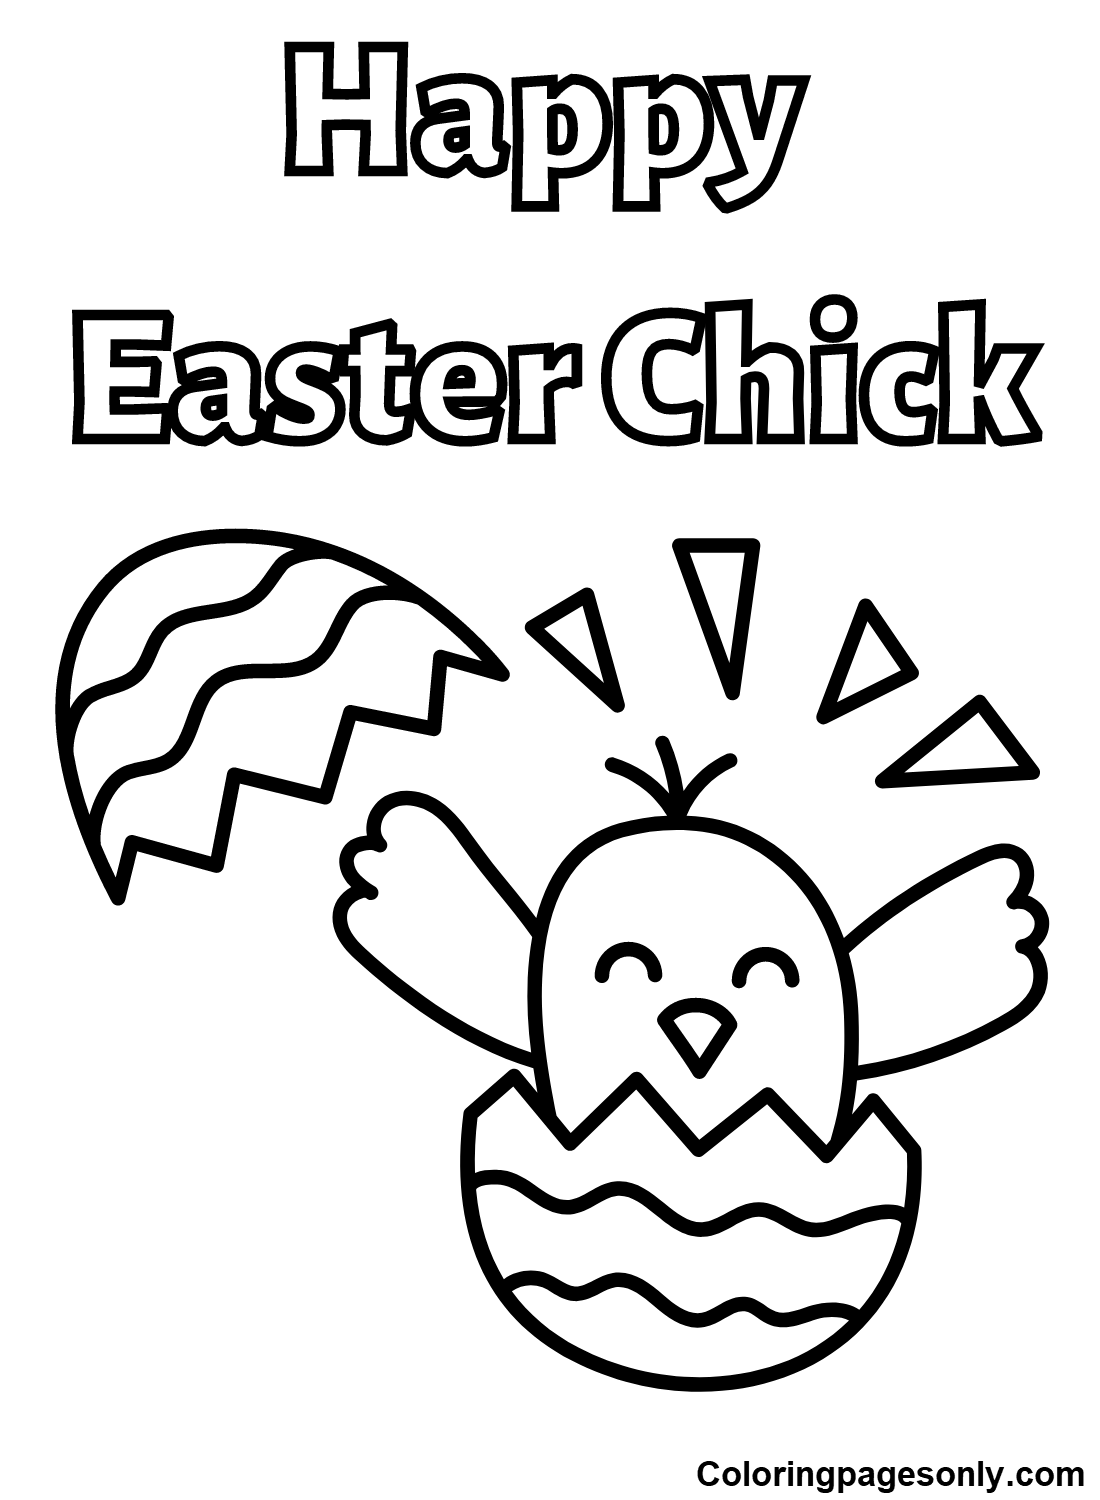 Easter chick coloring pages printable for free download